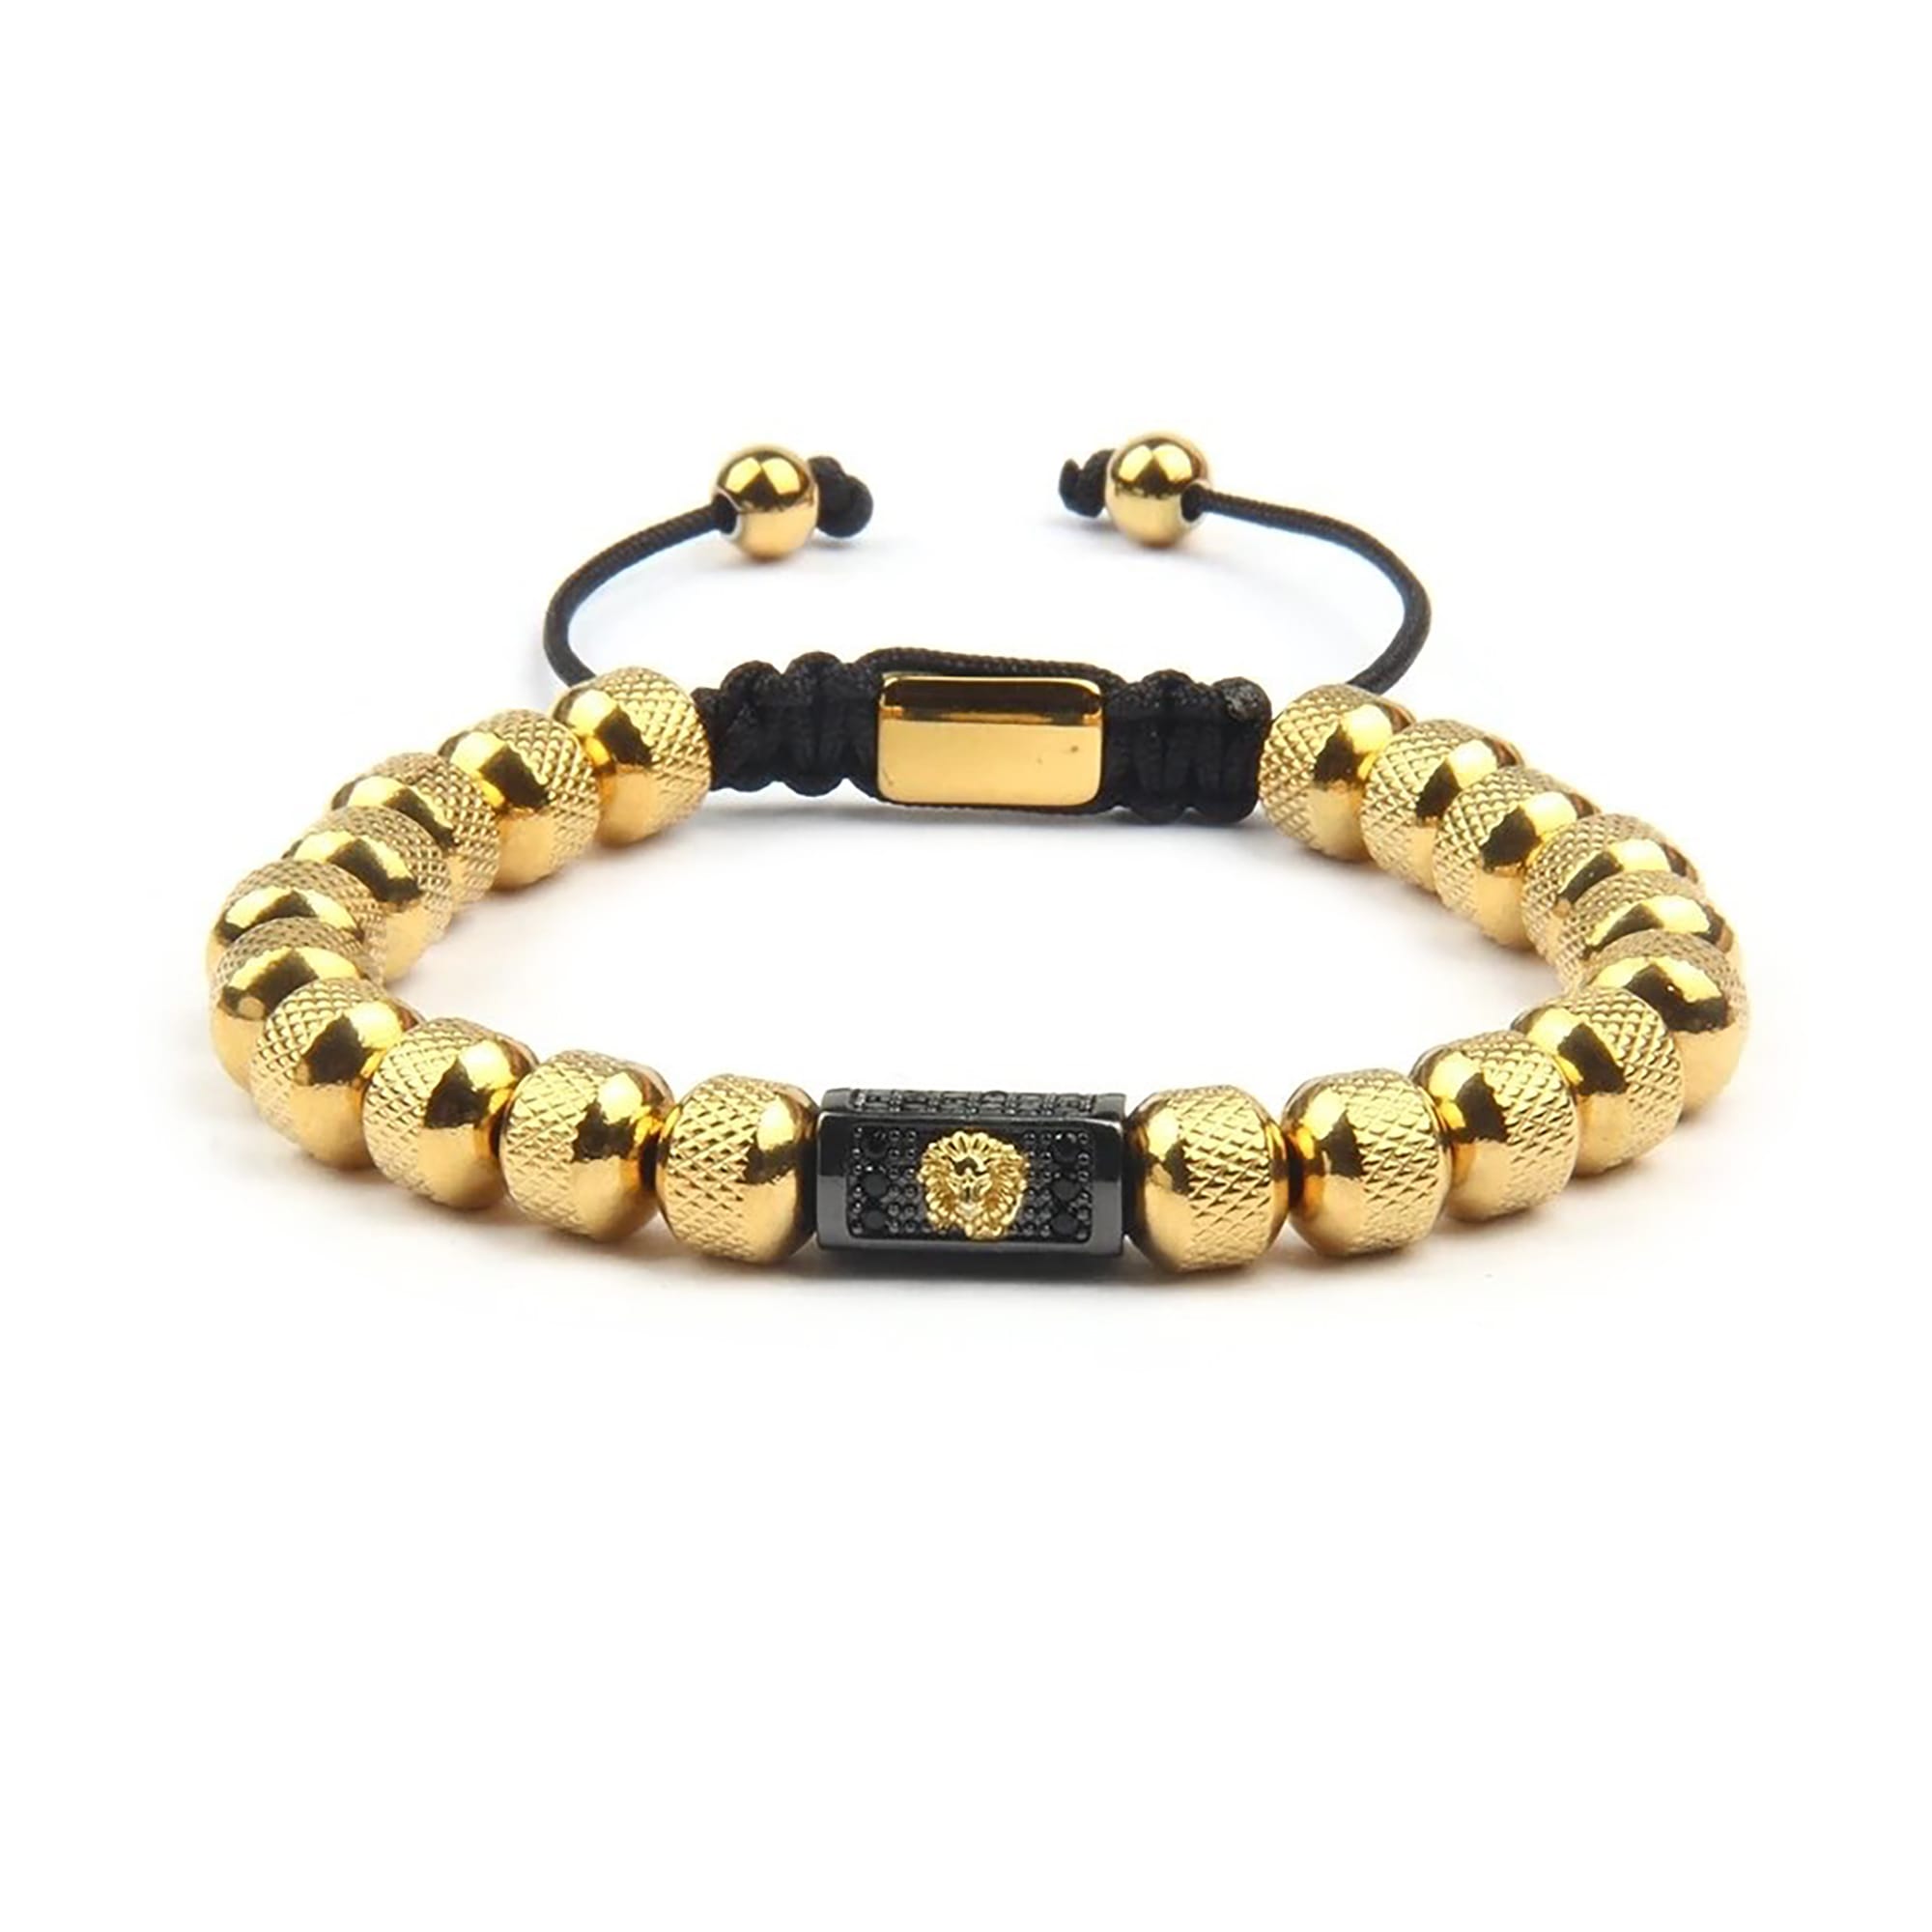 Luxury 14mm Designer Cuban Crystal Chain Bracelet For Men With Copper  Accents, 18k Gold Diamonds, And Zirconia Accent Perfect Punk Hiphop Jewelry  Gift In 7 8 Inches From Trendy_jewelry, $53.64 | DHgate.Com